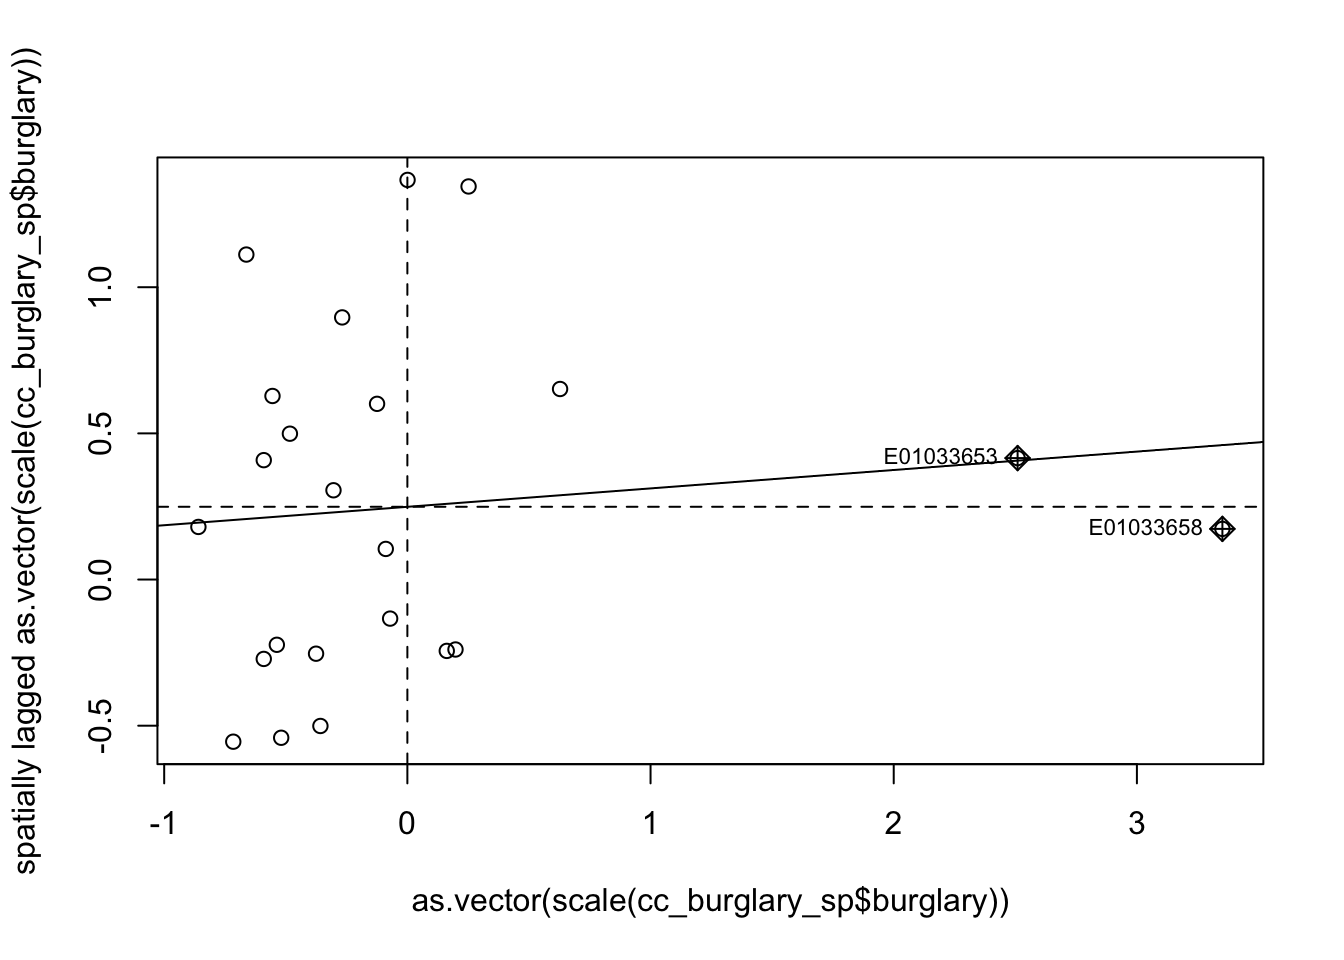 A scatterplot with a fitted straight line. The label of the horizontal axis is an R command on our burglary data, while the horizontal axis is labeled as the same command, but 'spatially lagged'. The vertical axis ranges from negative point six to one point five, and the horizontal axis from negative one to over three. Many small circles are plotted, mostly to the left of zero, with a handful between zero and one. A dashed vertical line appears at zero, and a dashed horizontal line around point three. The fitted line intersects these two dashed lines at their intersection, and has a small positive slope. Two crossed diamonds appear on the far right, near the horizontal dotted line and fitted line, labeled with 'E' followed by many numbers.